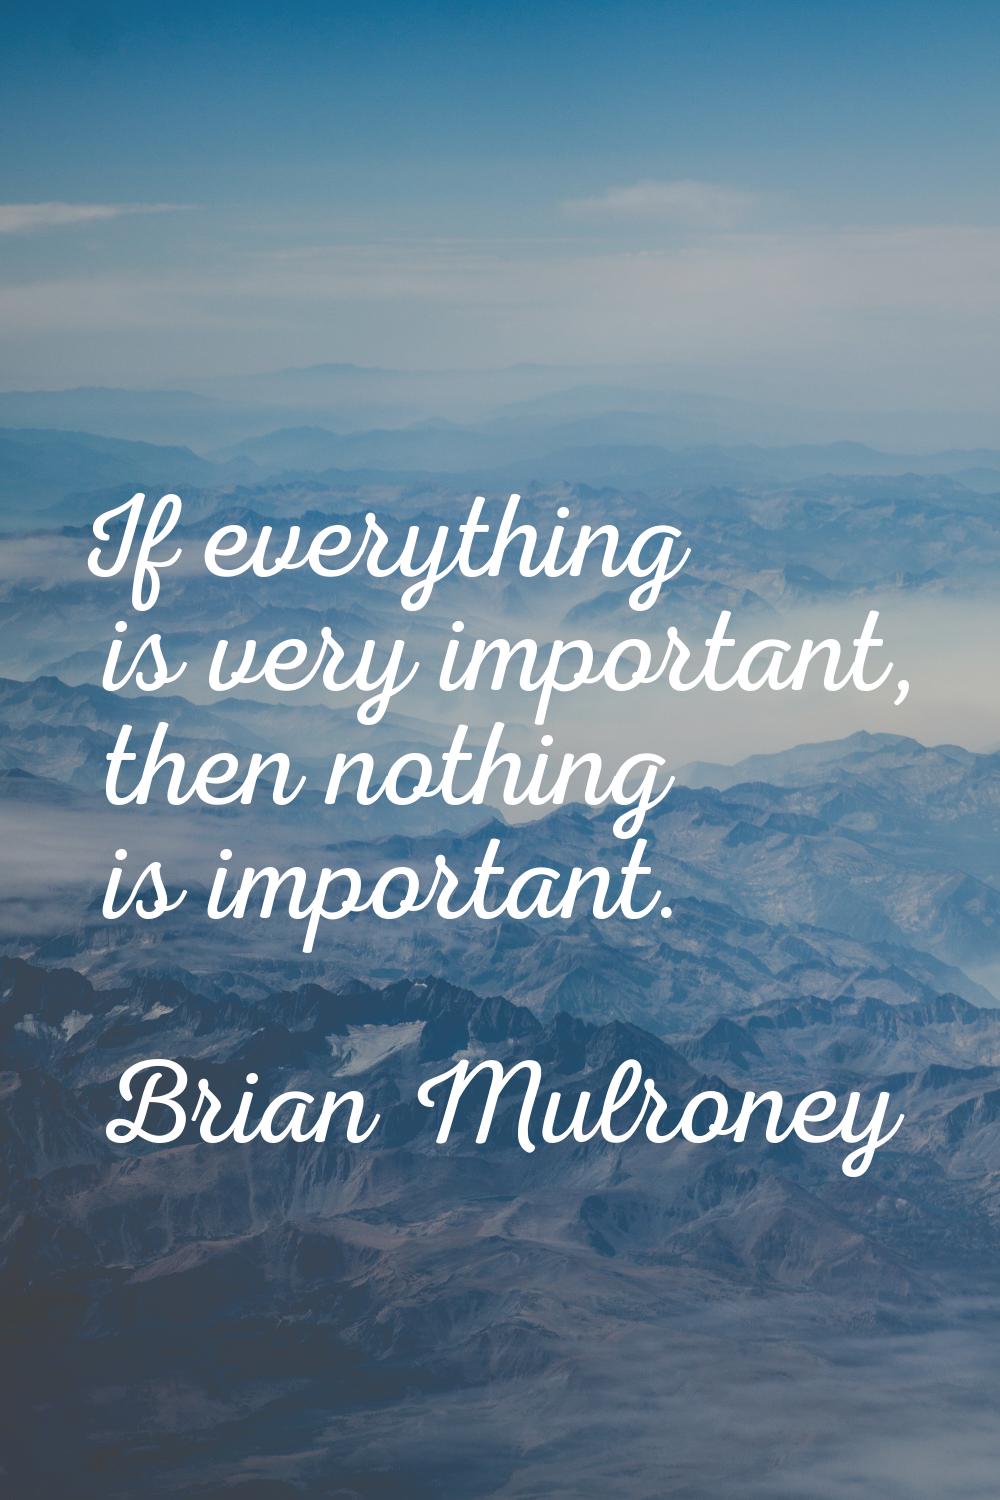 If everything is very important, then nothing is important.